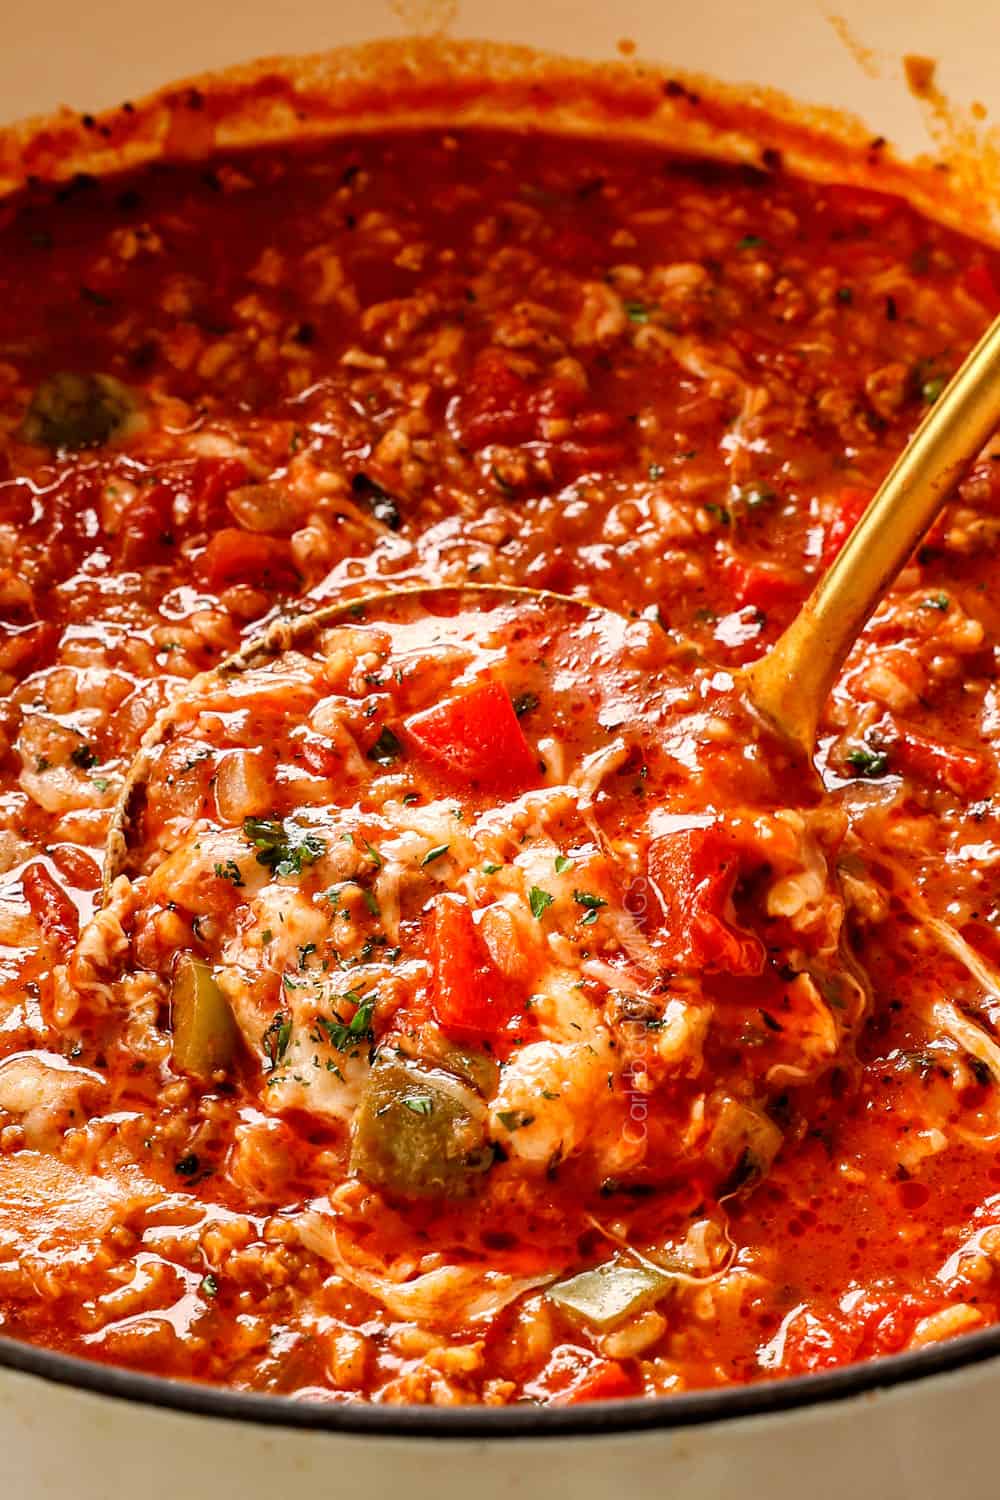 a ladle of stuffed pepper soup recipe with red and green bell peppers, Italian sausage and rice